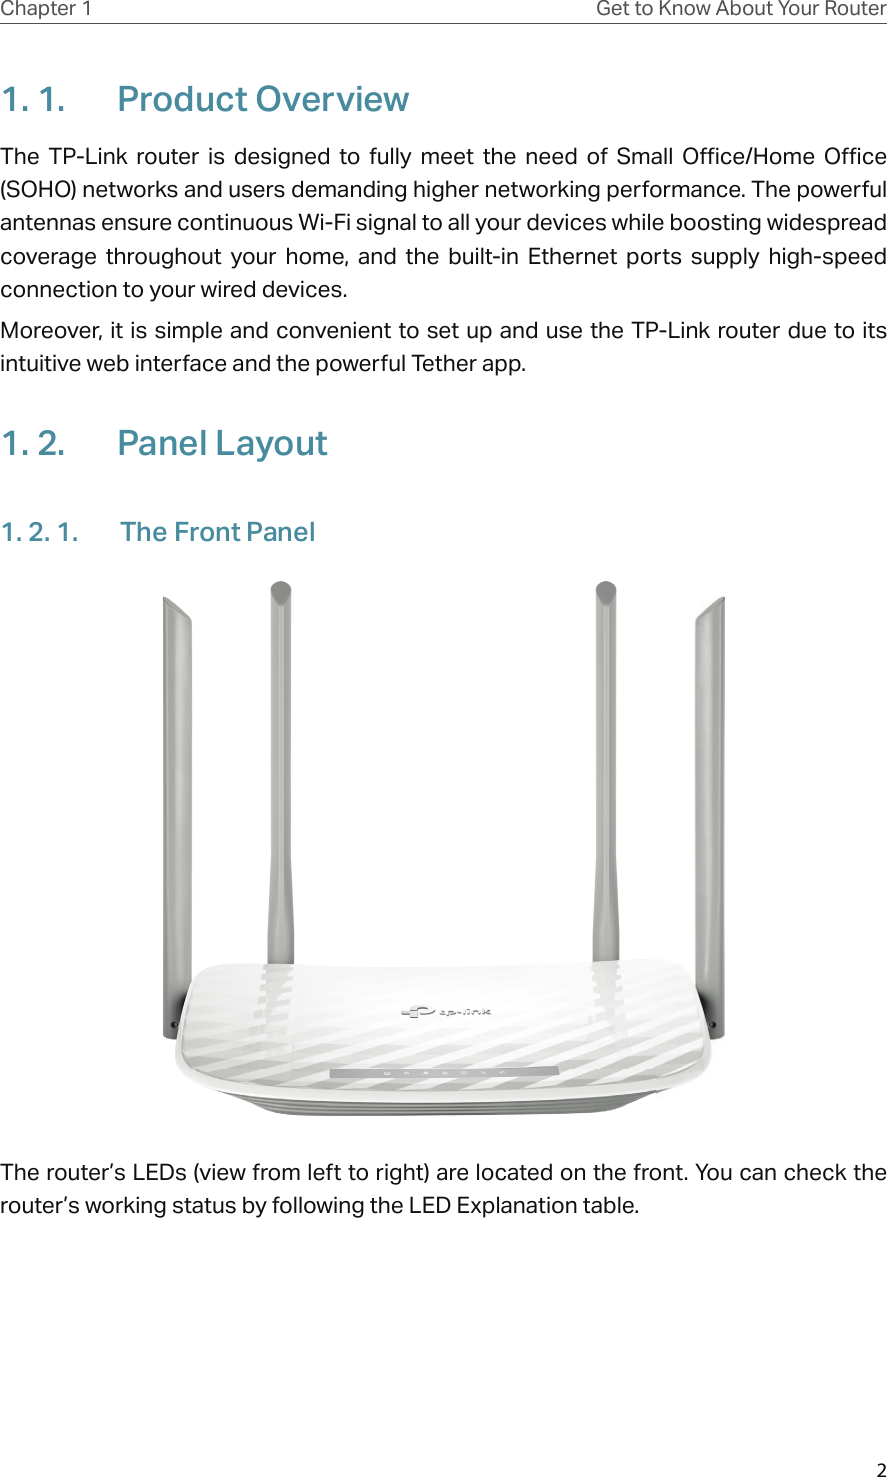 2Chapter 1 Get to Know About Your Router1. 1.  Product OverviewThe  TP-Link  router  is  designed  to  fully  meet  the  need  of  Small  Office/Home  Office (SOHO) networks and users demanding higher networking performance. The powerful antennas ensure continuous Wi-Fi signal to all your devices while boosting widespread coverage  throughout  your  home,  and  the  built-in  Ethernet  ports  supply  high-speed connection to your wired devices.Moreover, it is simple and convenient to set up and use the TP-Link router due to its intuitive web interface and the powerful Tether app.  1. 2.  Panel Layout1. 2. 1.  The Front PanelThe router’s LEDs (view from left to right) are located on the front. You can check the router’s working status by following the LED Explanation table.